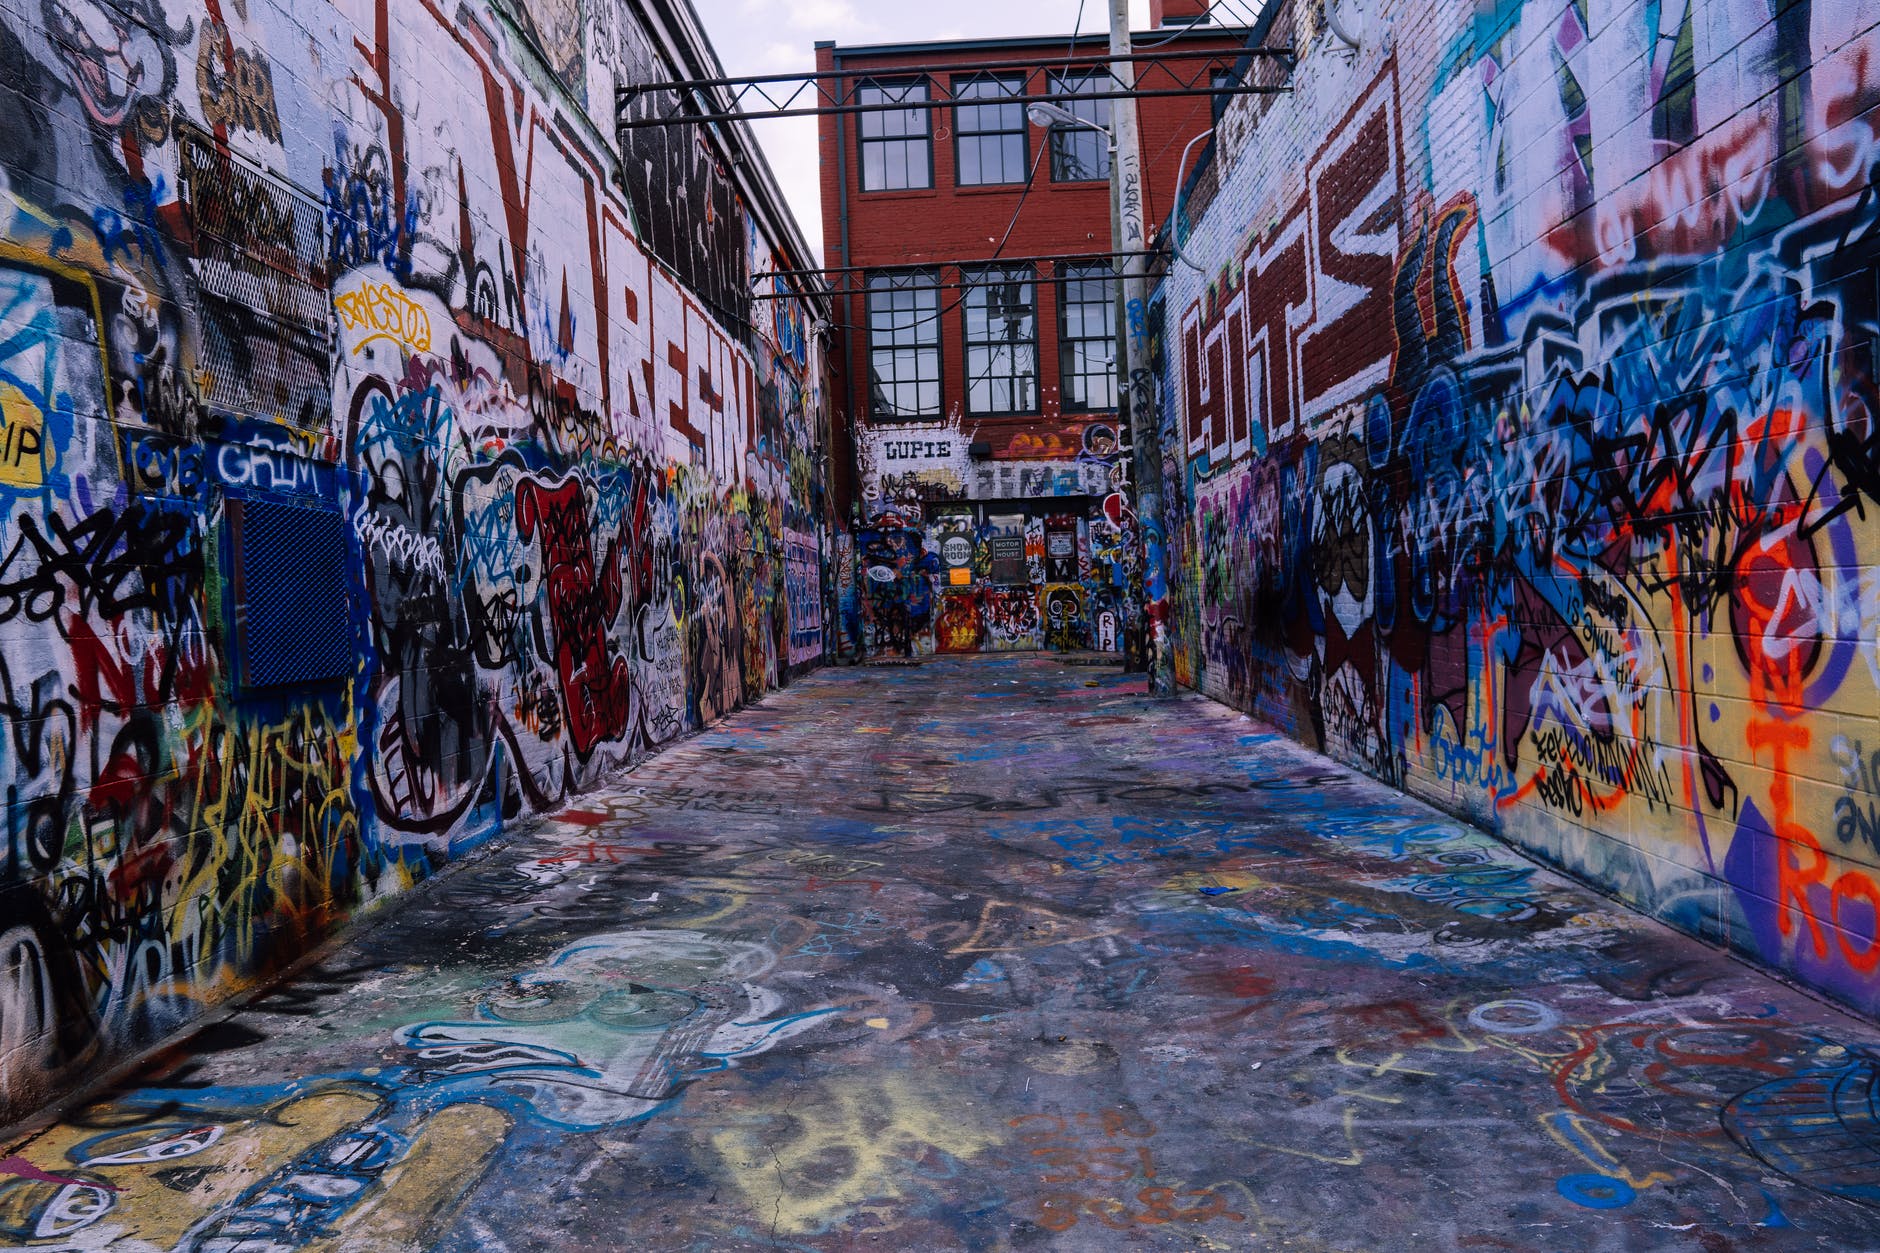 Graffiti Alley in Baltimore. Great for Instagram photos.